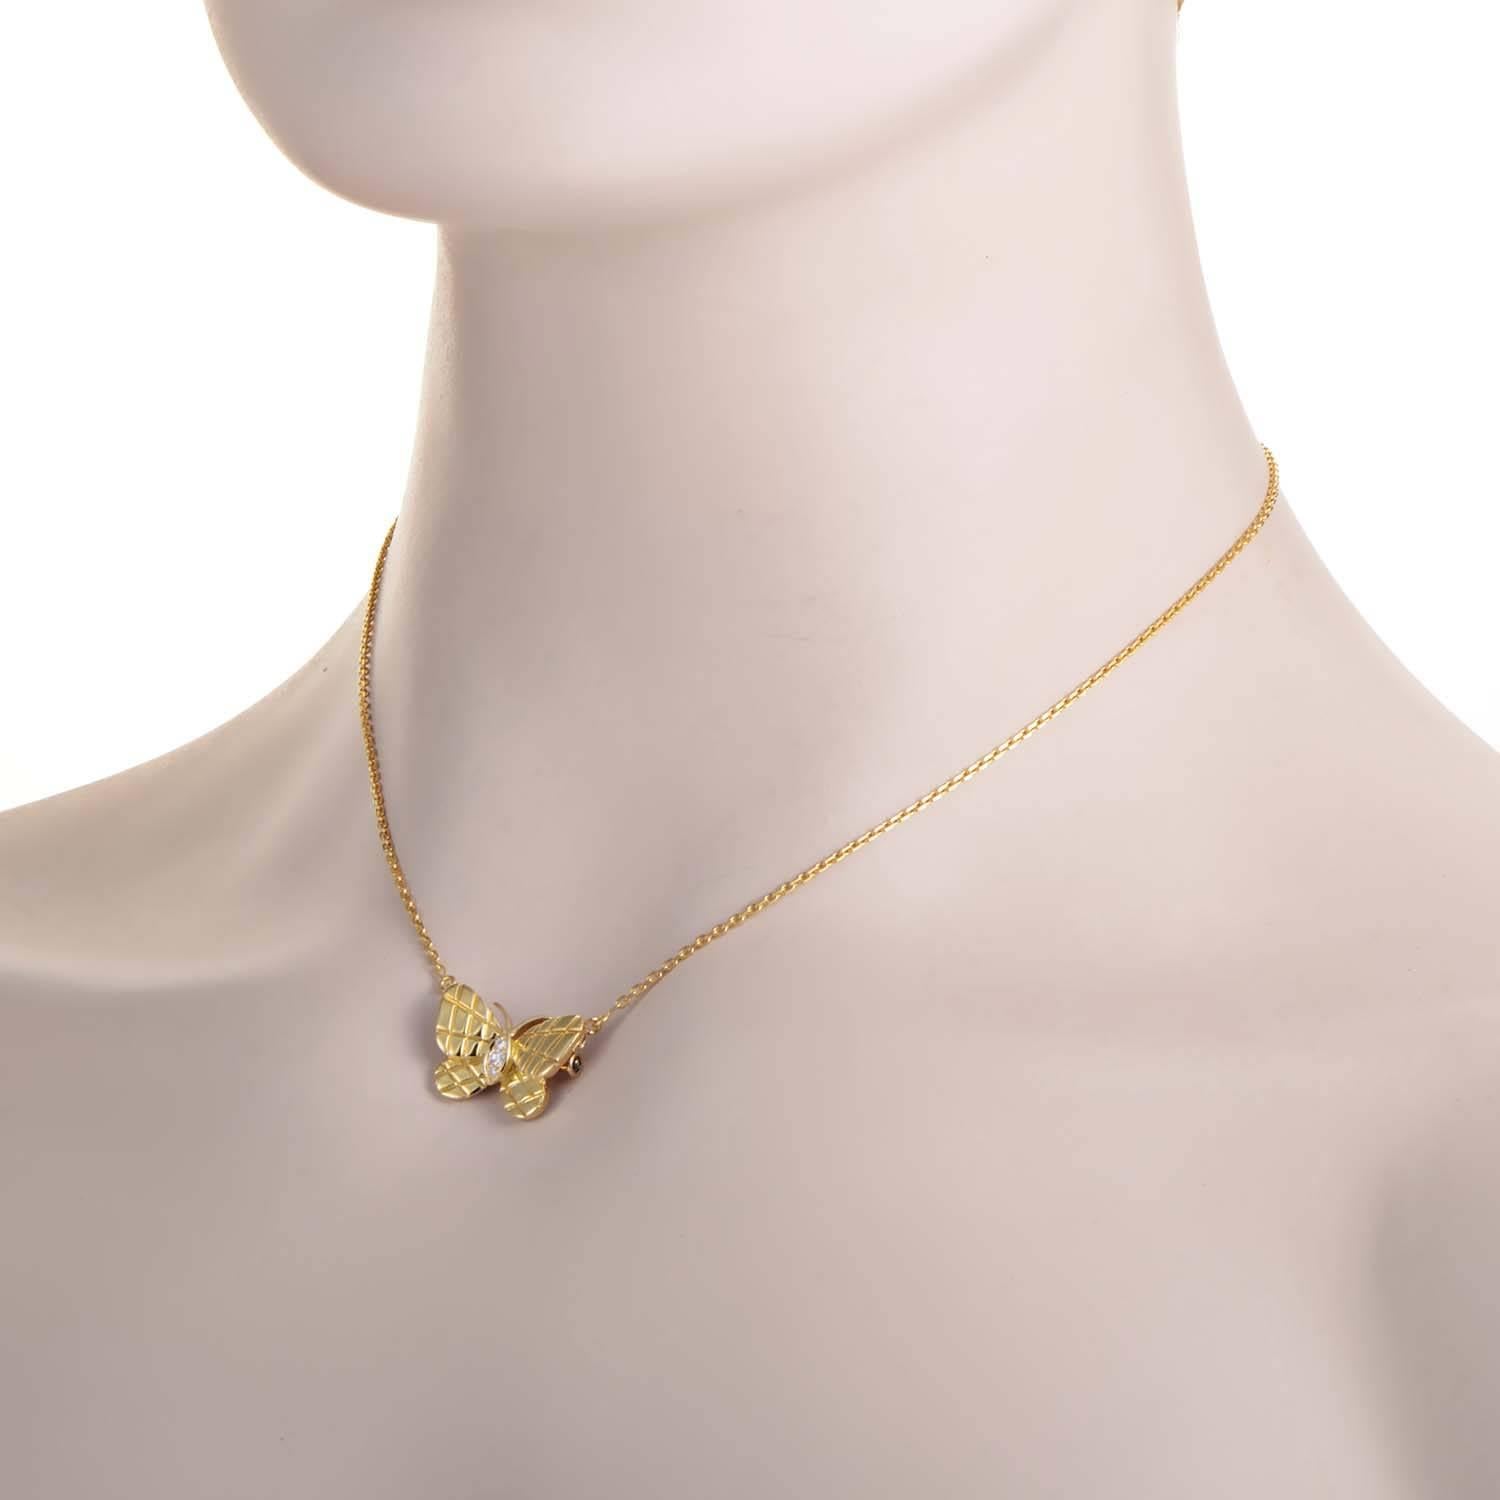 A sentimentally charming piece by Van Cleef & Arpels, this 18K yellow gold necklace is beautifully embellished with a butterfly pendant with the dual function of a brooch. The chain is cleverly clasped onto the pendant with ring spring clasps on